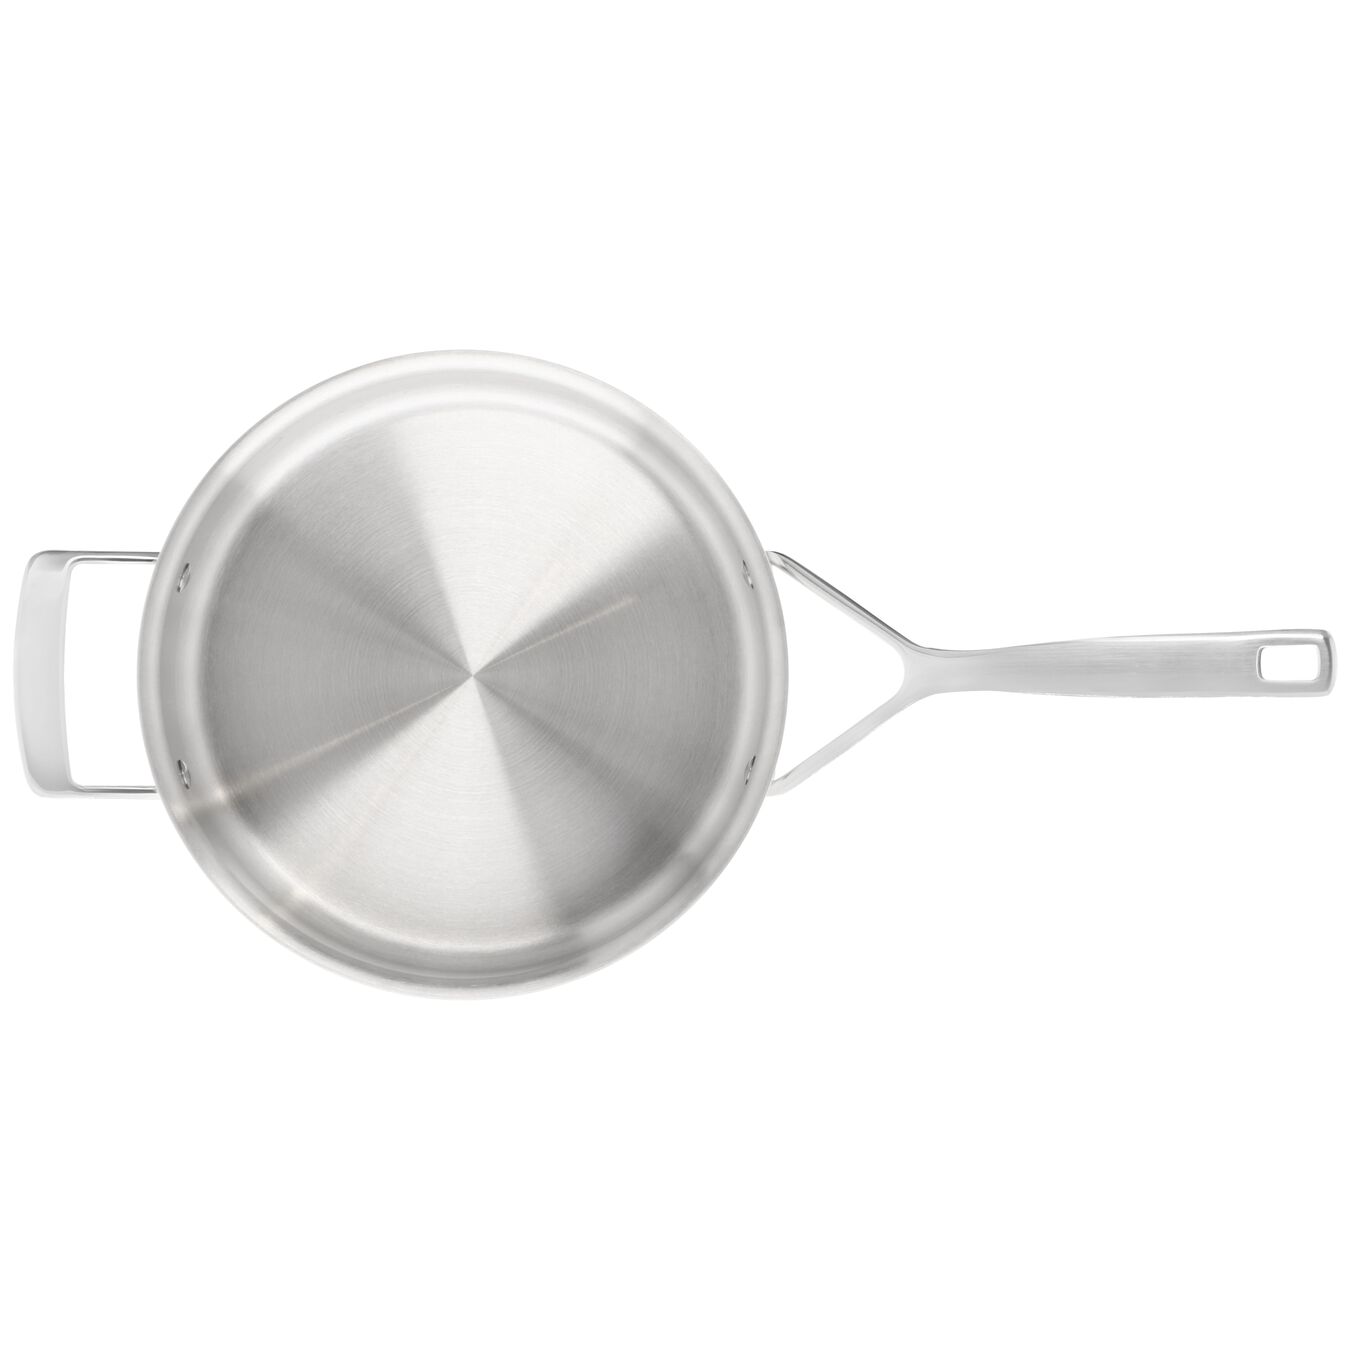 24 cm 18/10 Stainless Steel Saute pan,,large 2